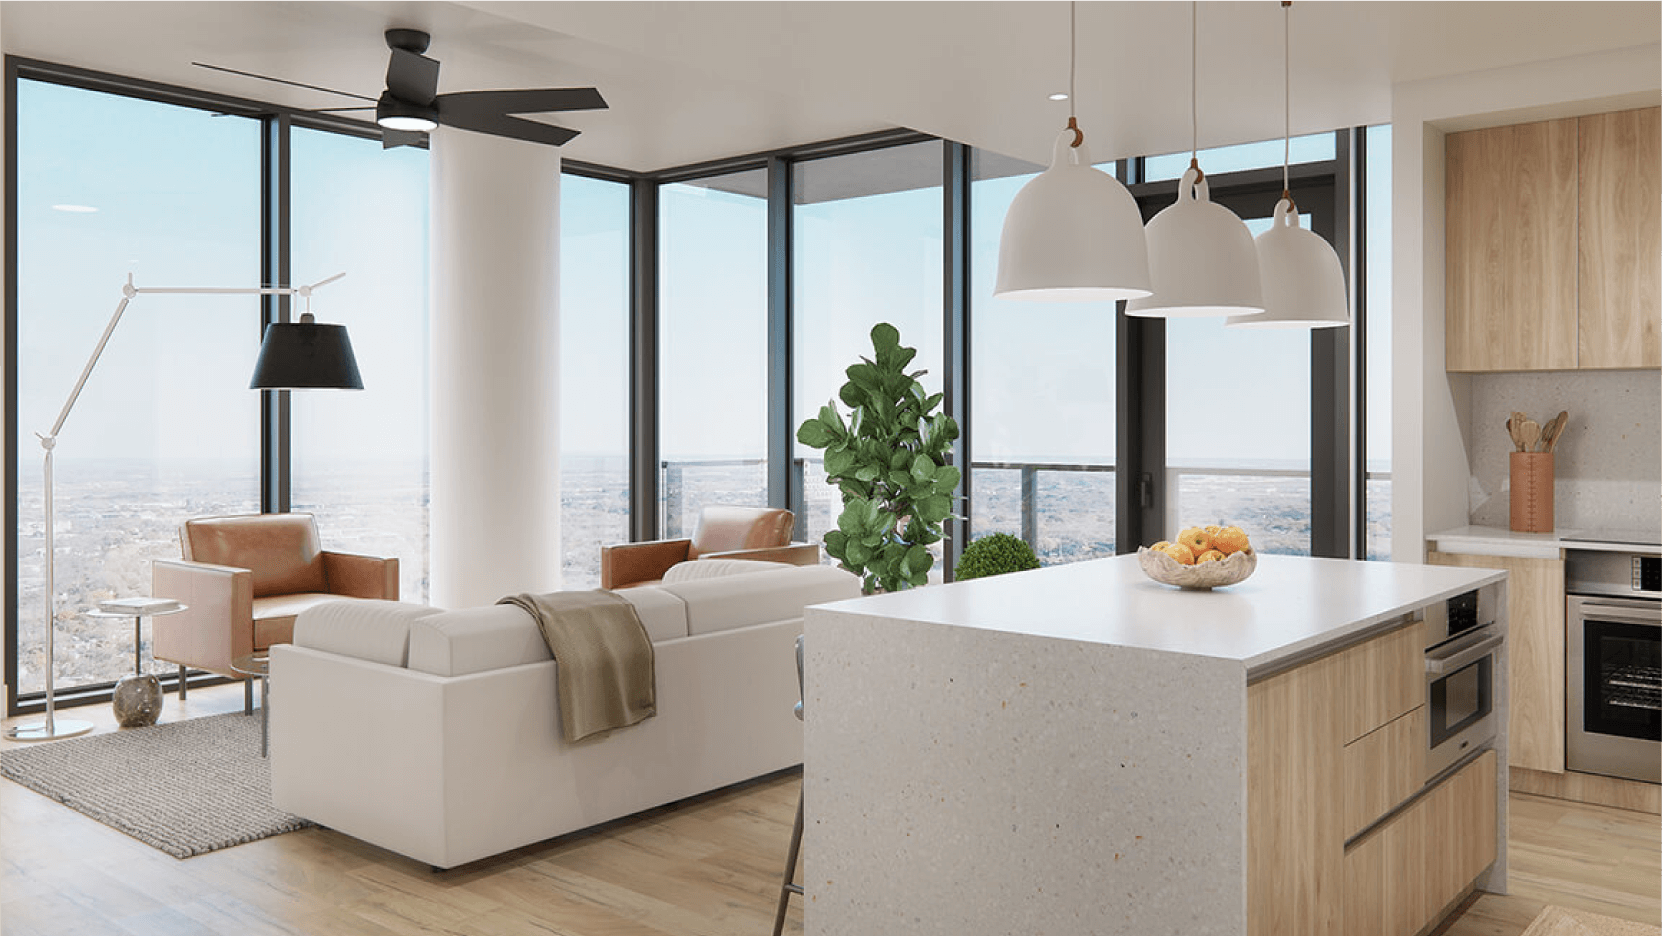 A well-lit, open-concept living room in high-rise condos at Vesper ATX, featuring a chic white sofa, tan leather armchairs, and a large white column, with a backdrop of downtown Austin's skyline through expansive windows.